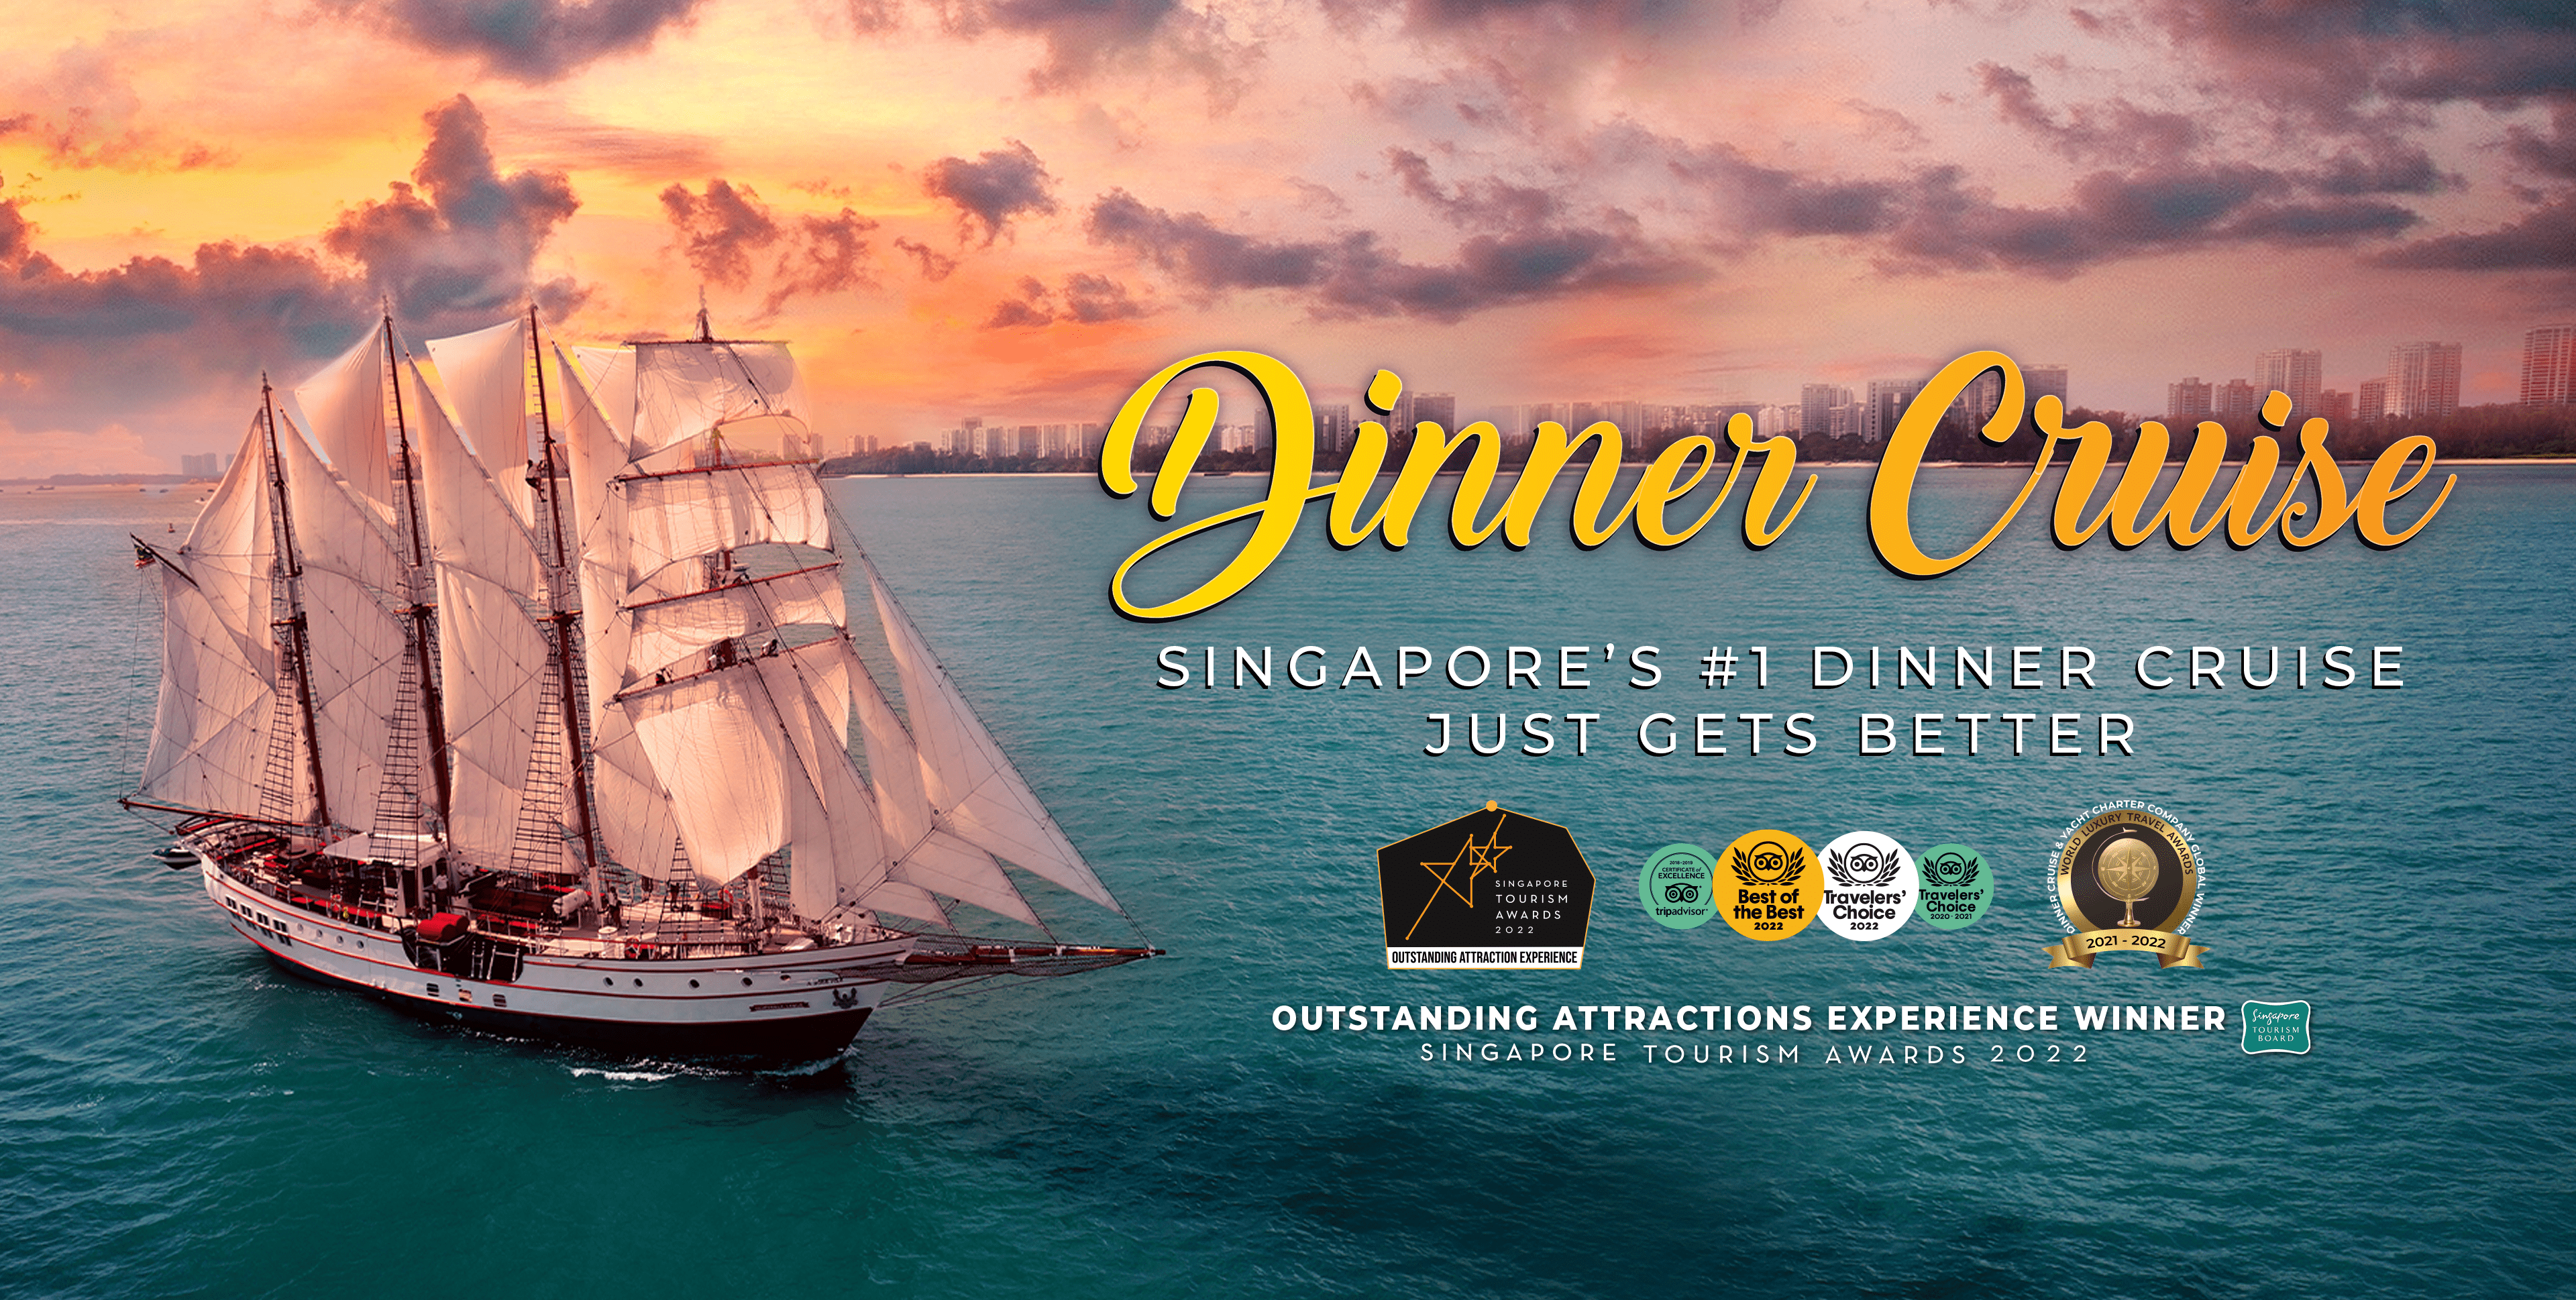 Singapore Attractions - Sunset Dinner Cruise by the Royal Albatross